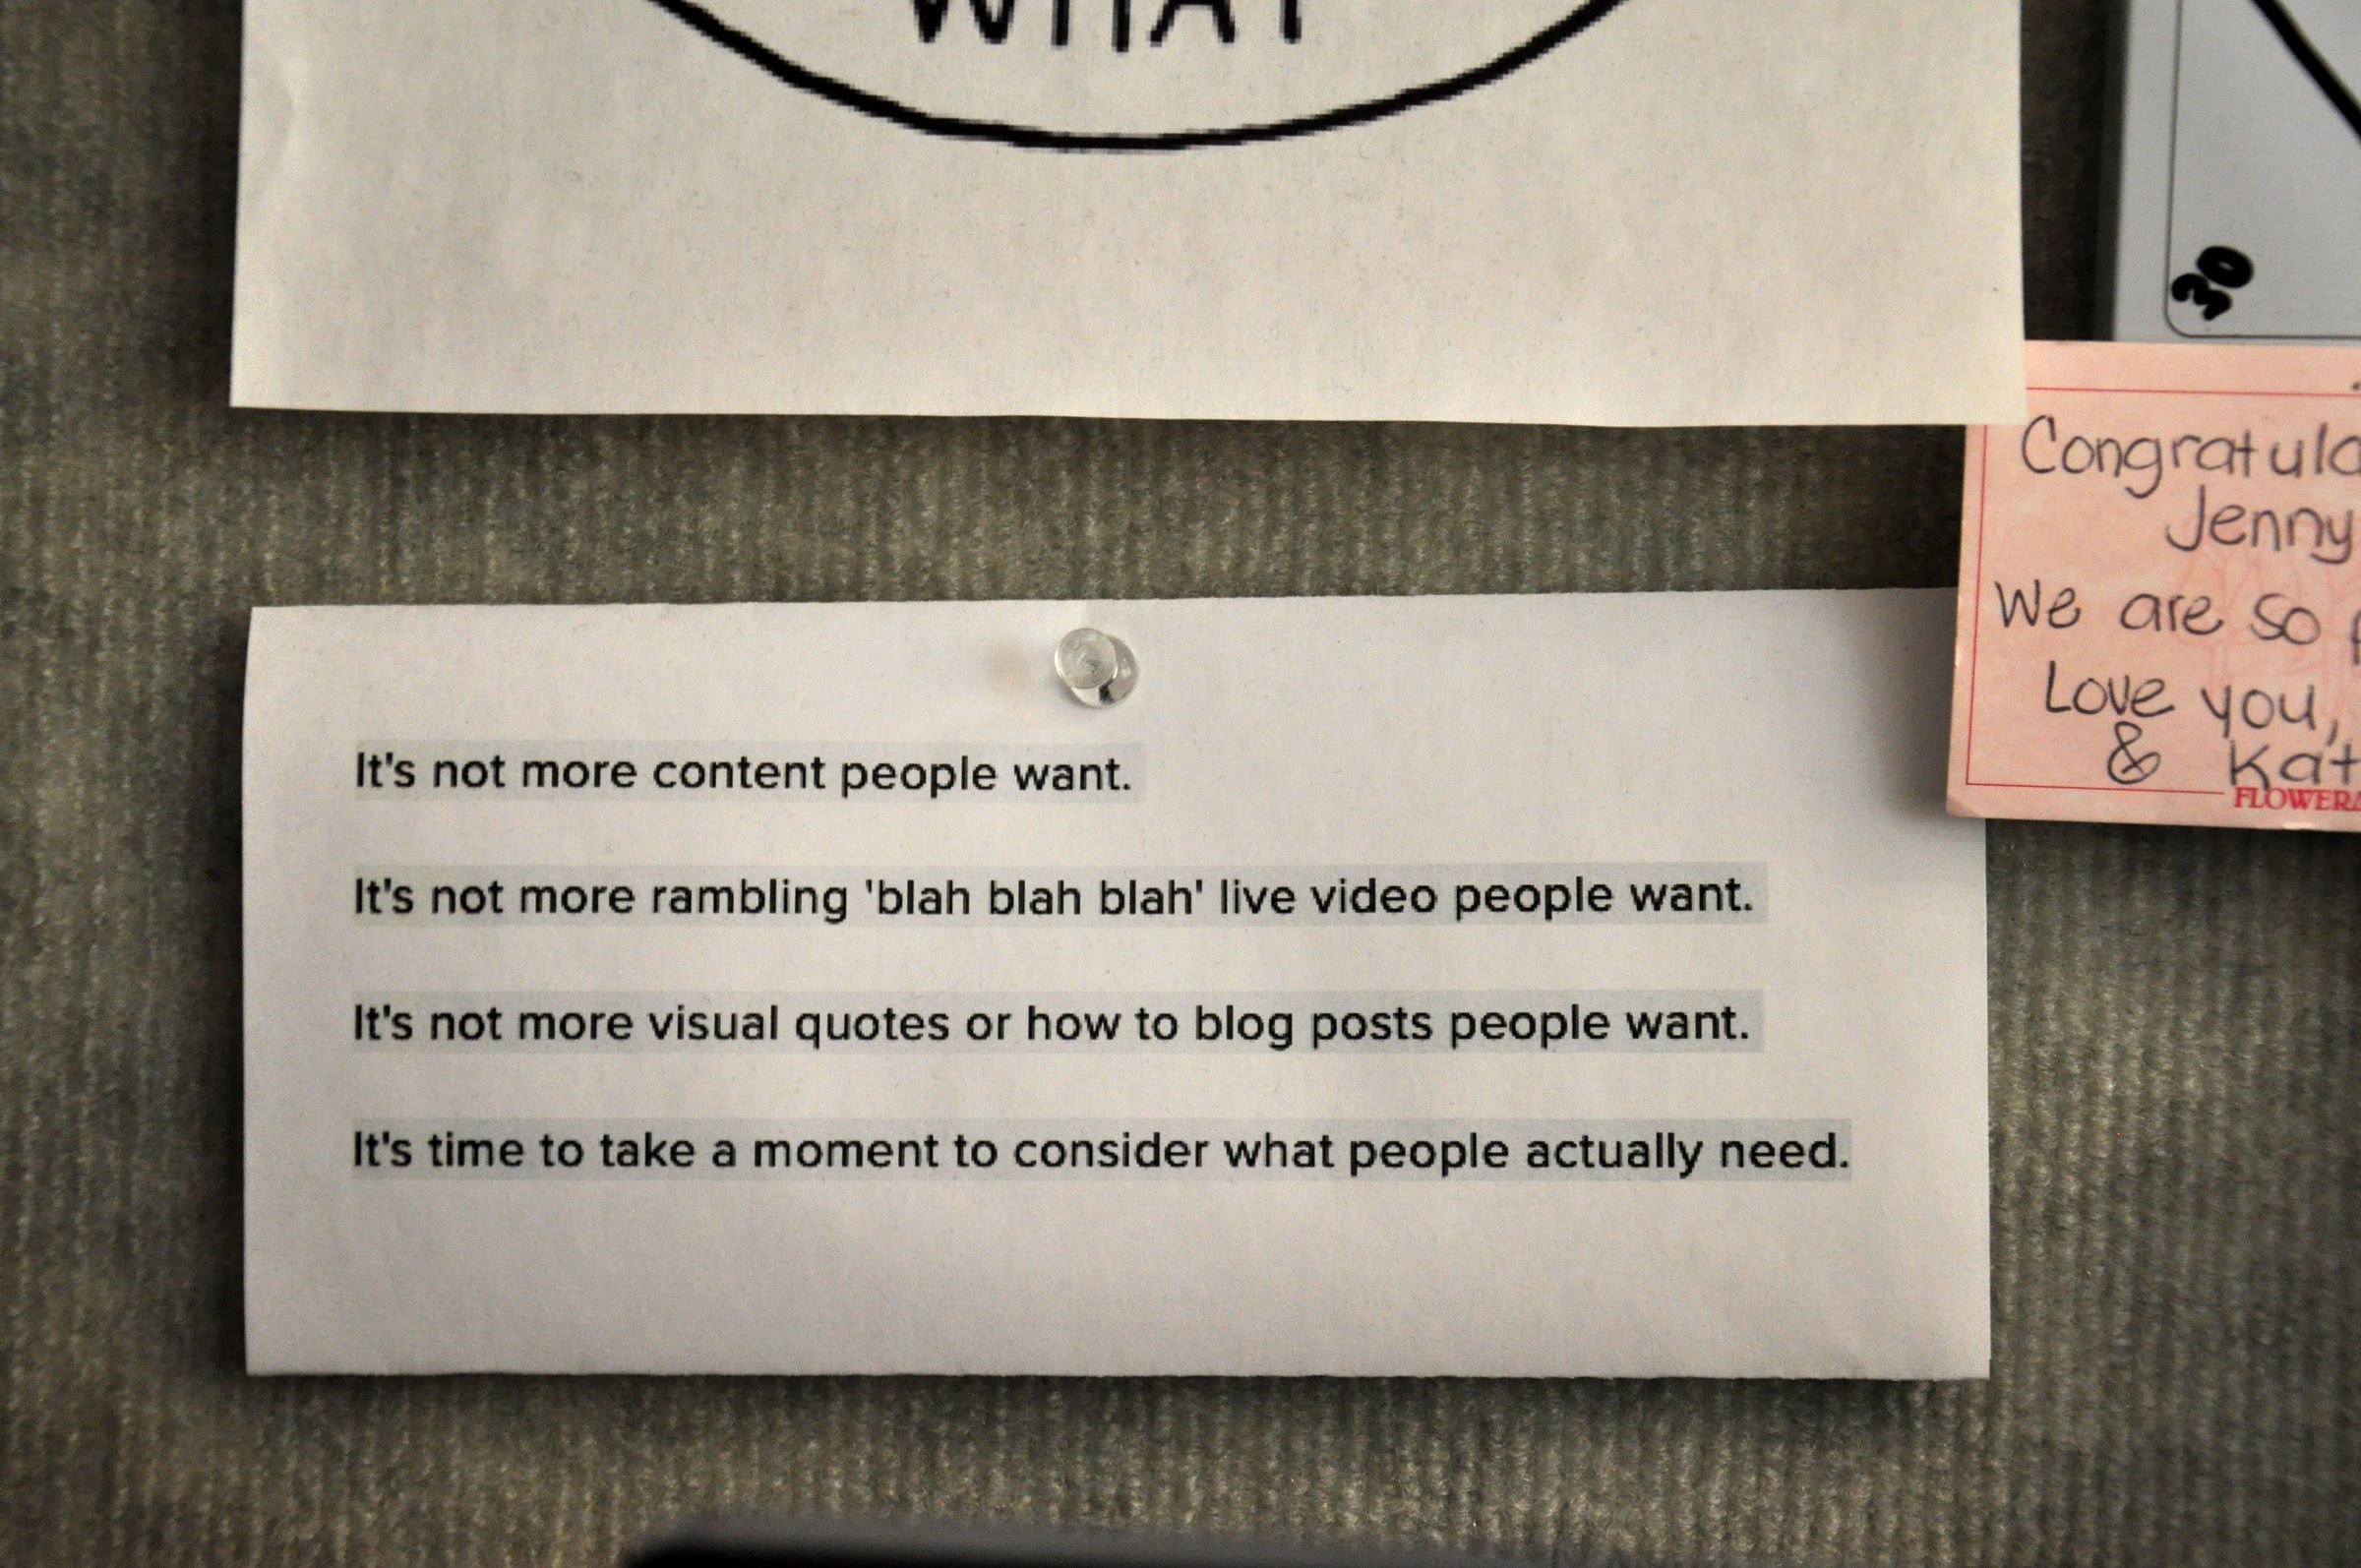 Sticky note on board with message “It’s not more content people want, it’s time to take a moment to consider what people actually need”